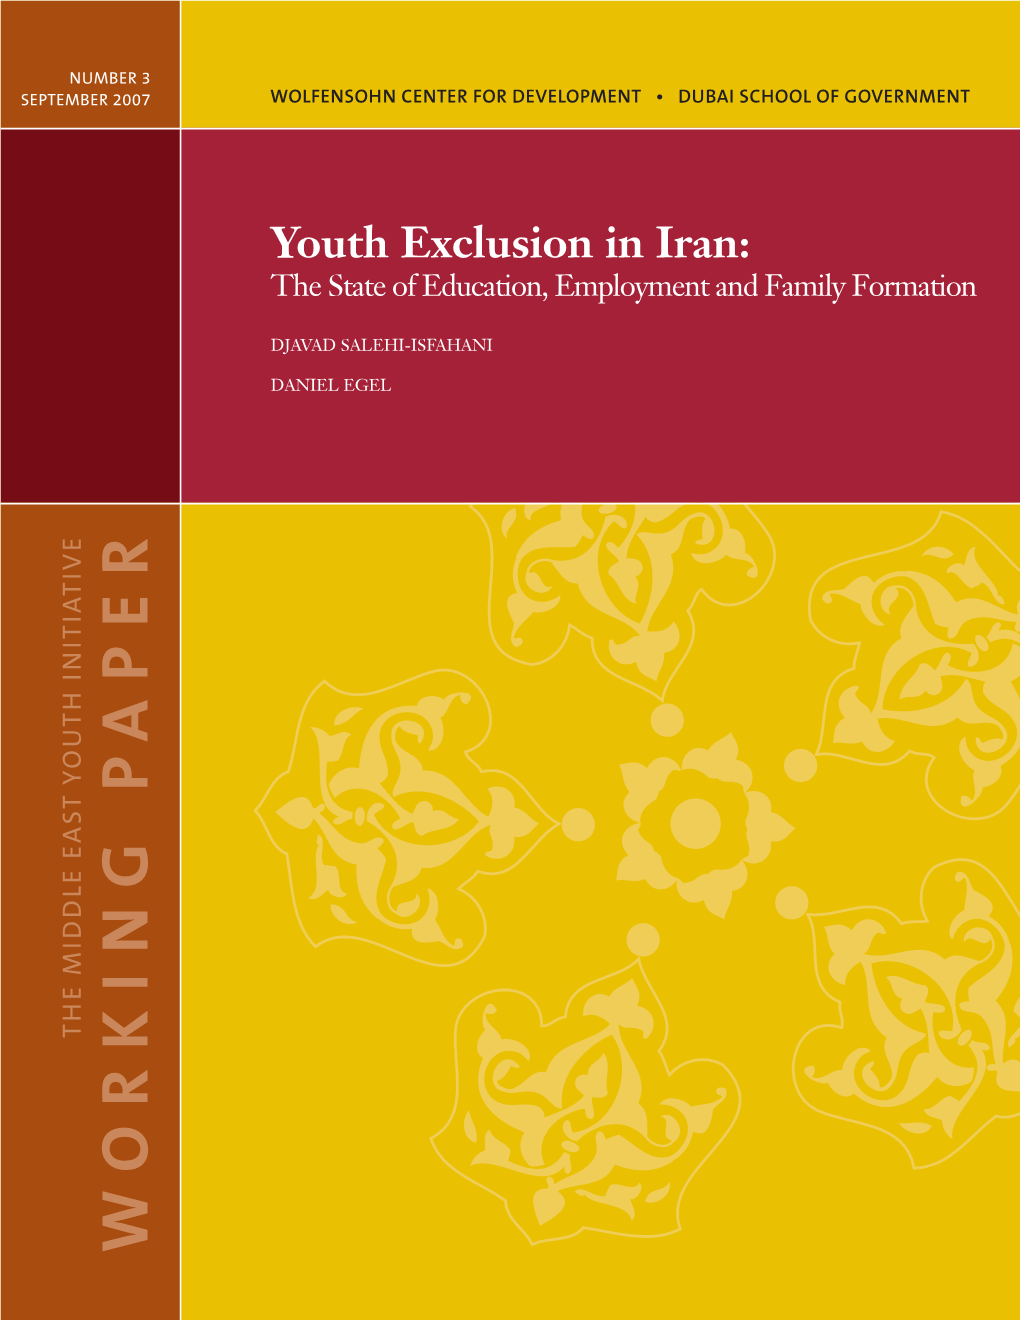 Youth Exclusion in Iran: the State of Education, Employment and Family Formation